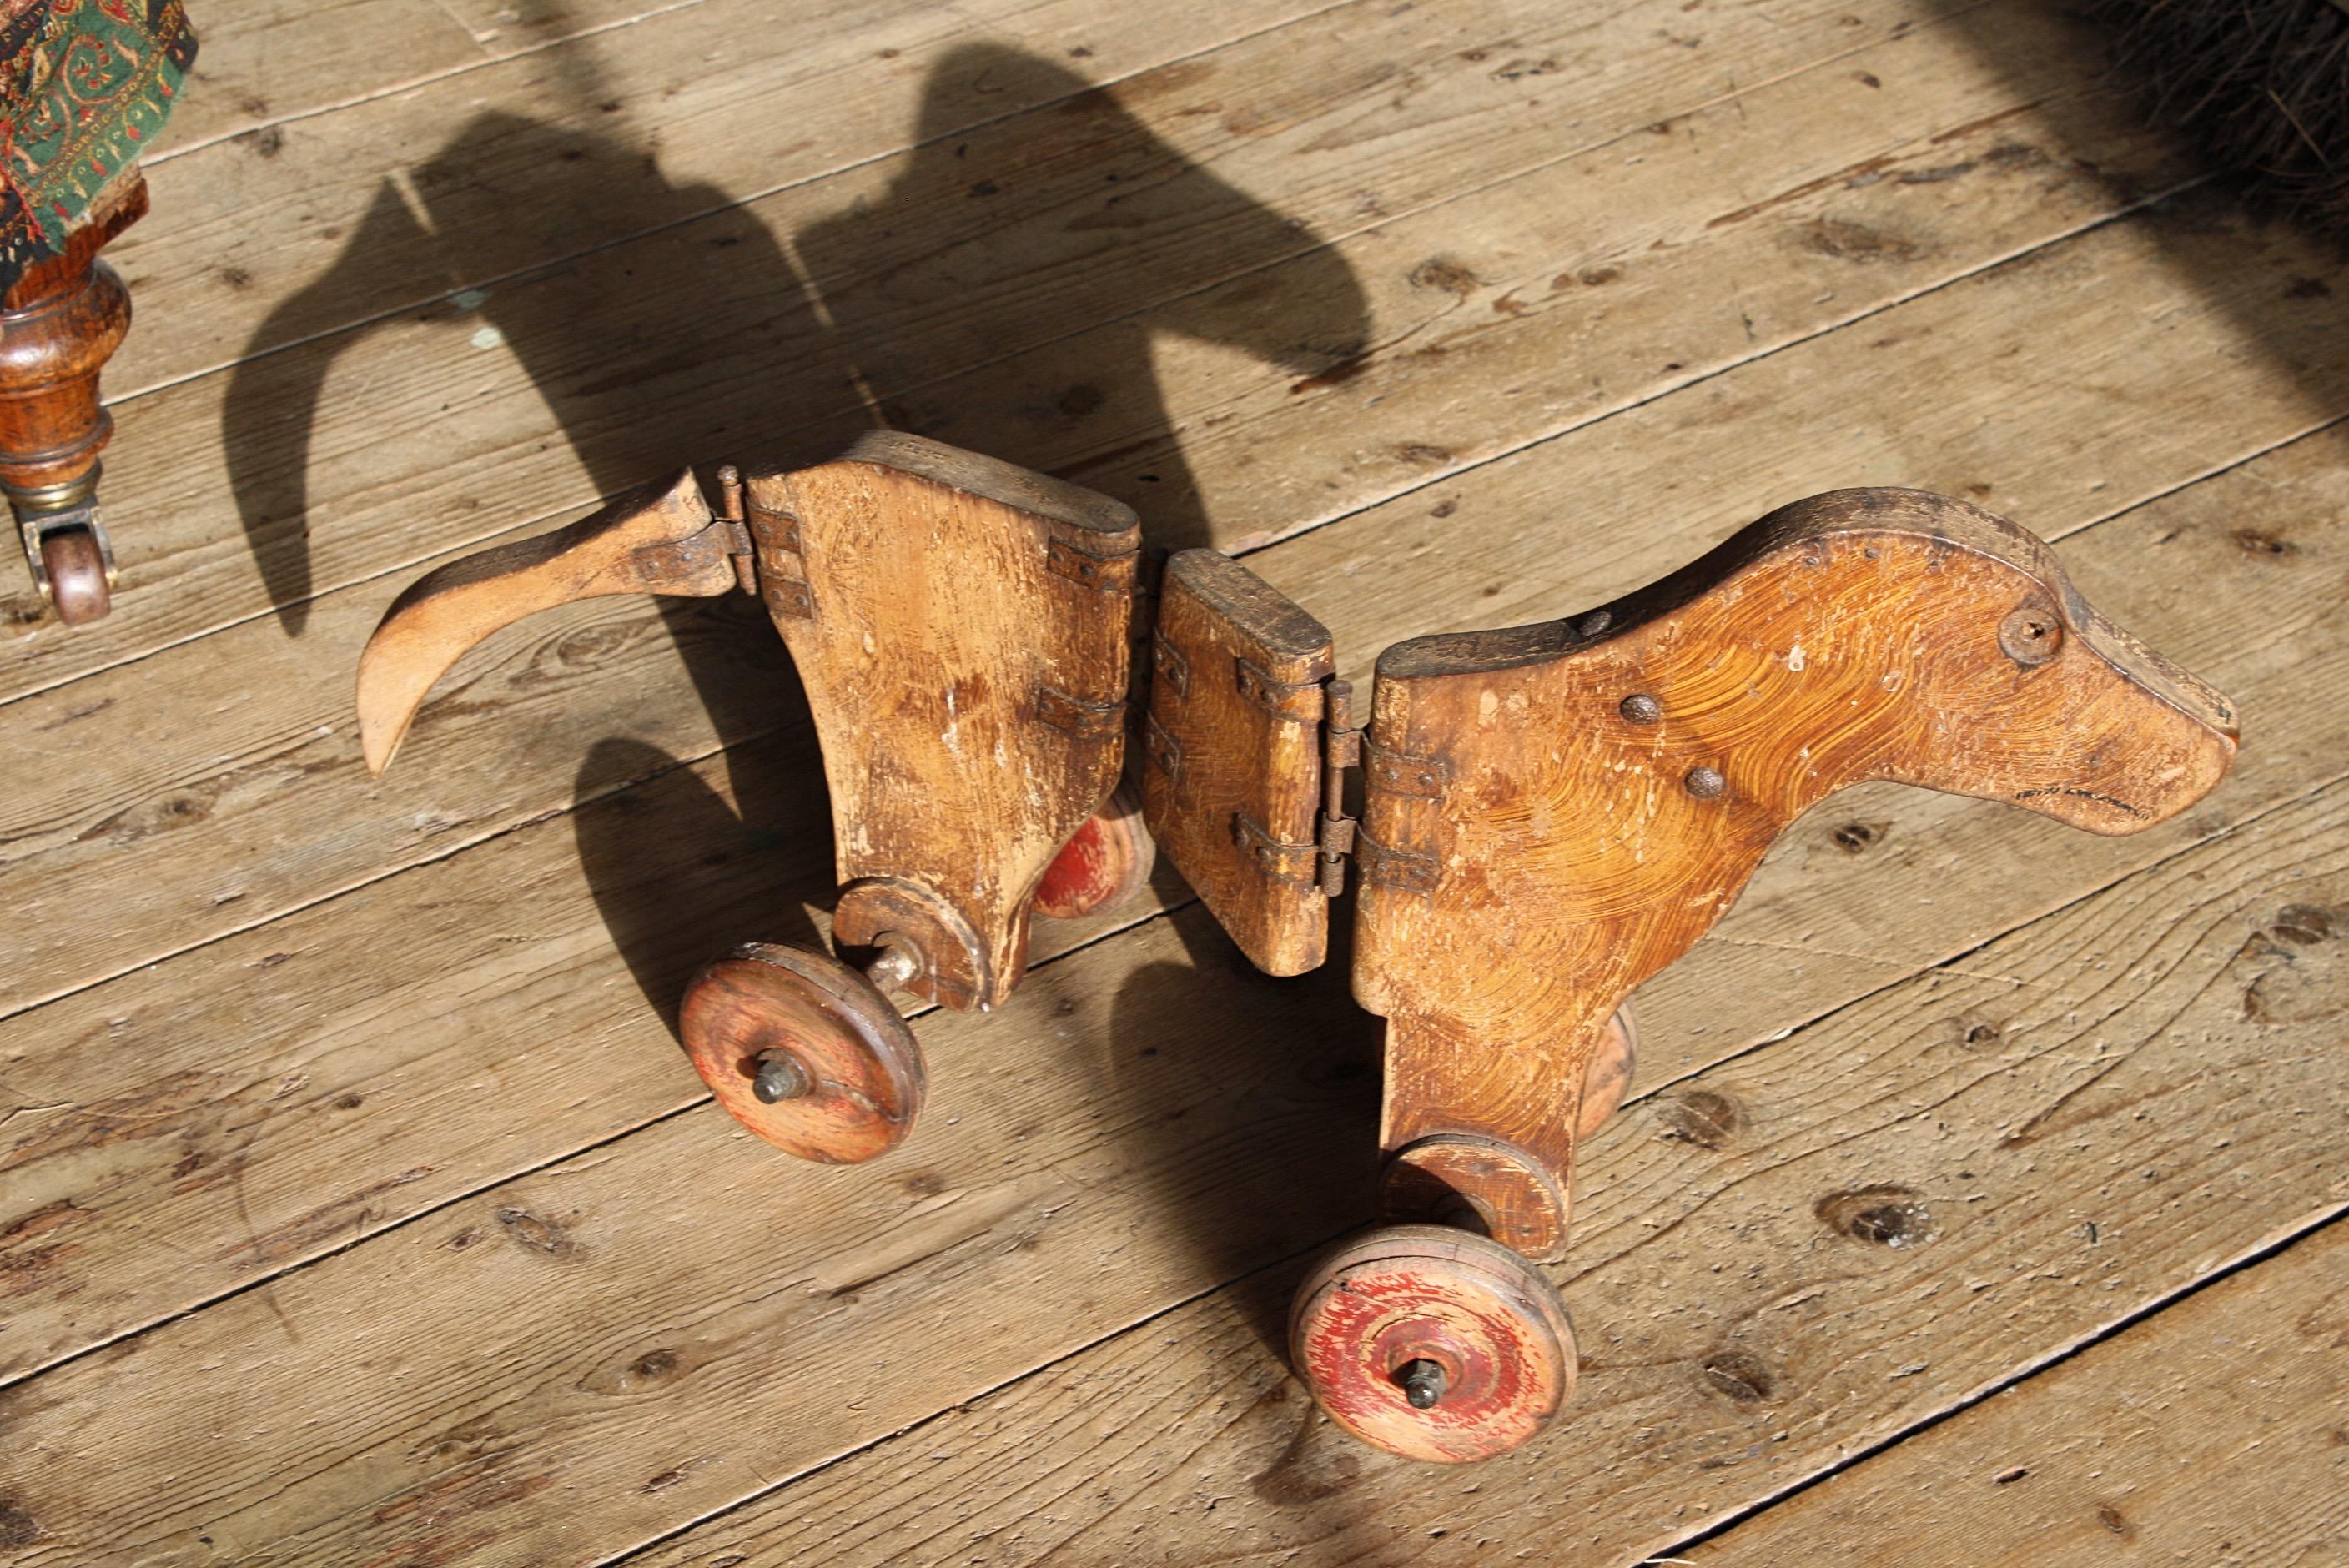 A wonderful early articulated pull along dog, possibly late 18th century in age if not early 19th century 

Original wrought iron pin hingers and scumble painted finish, with what of been letter box red wheel, now heavily faded with time. Iron